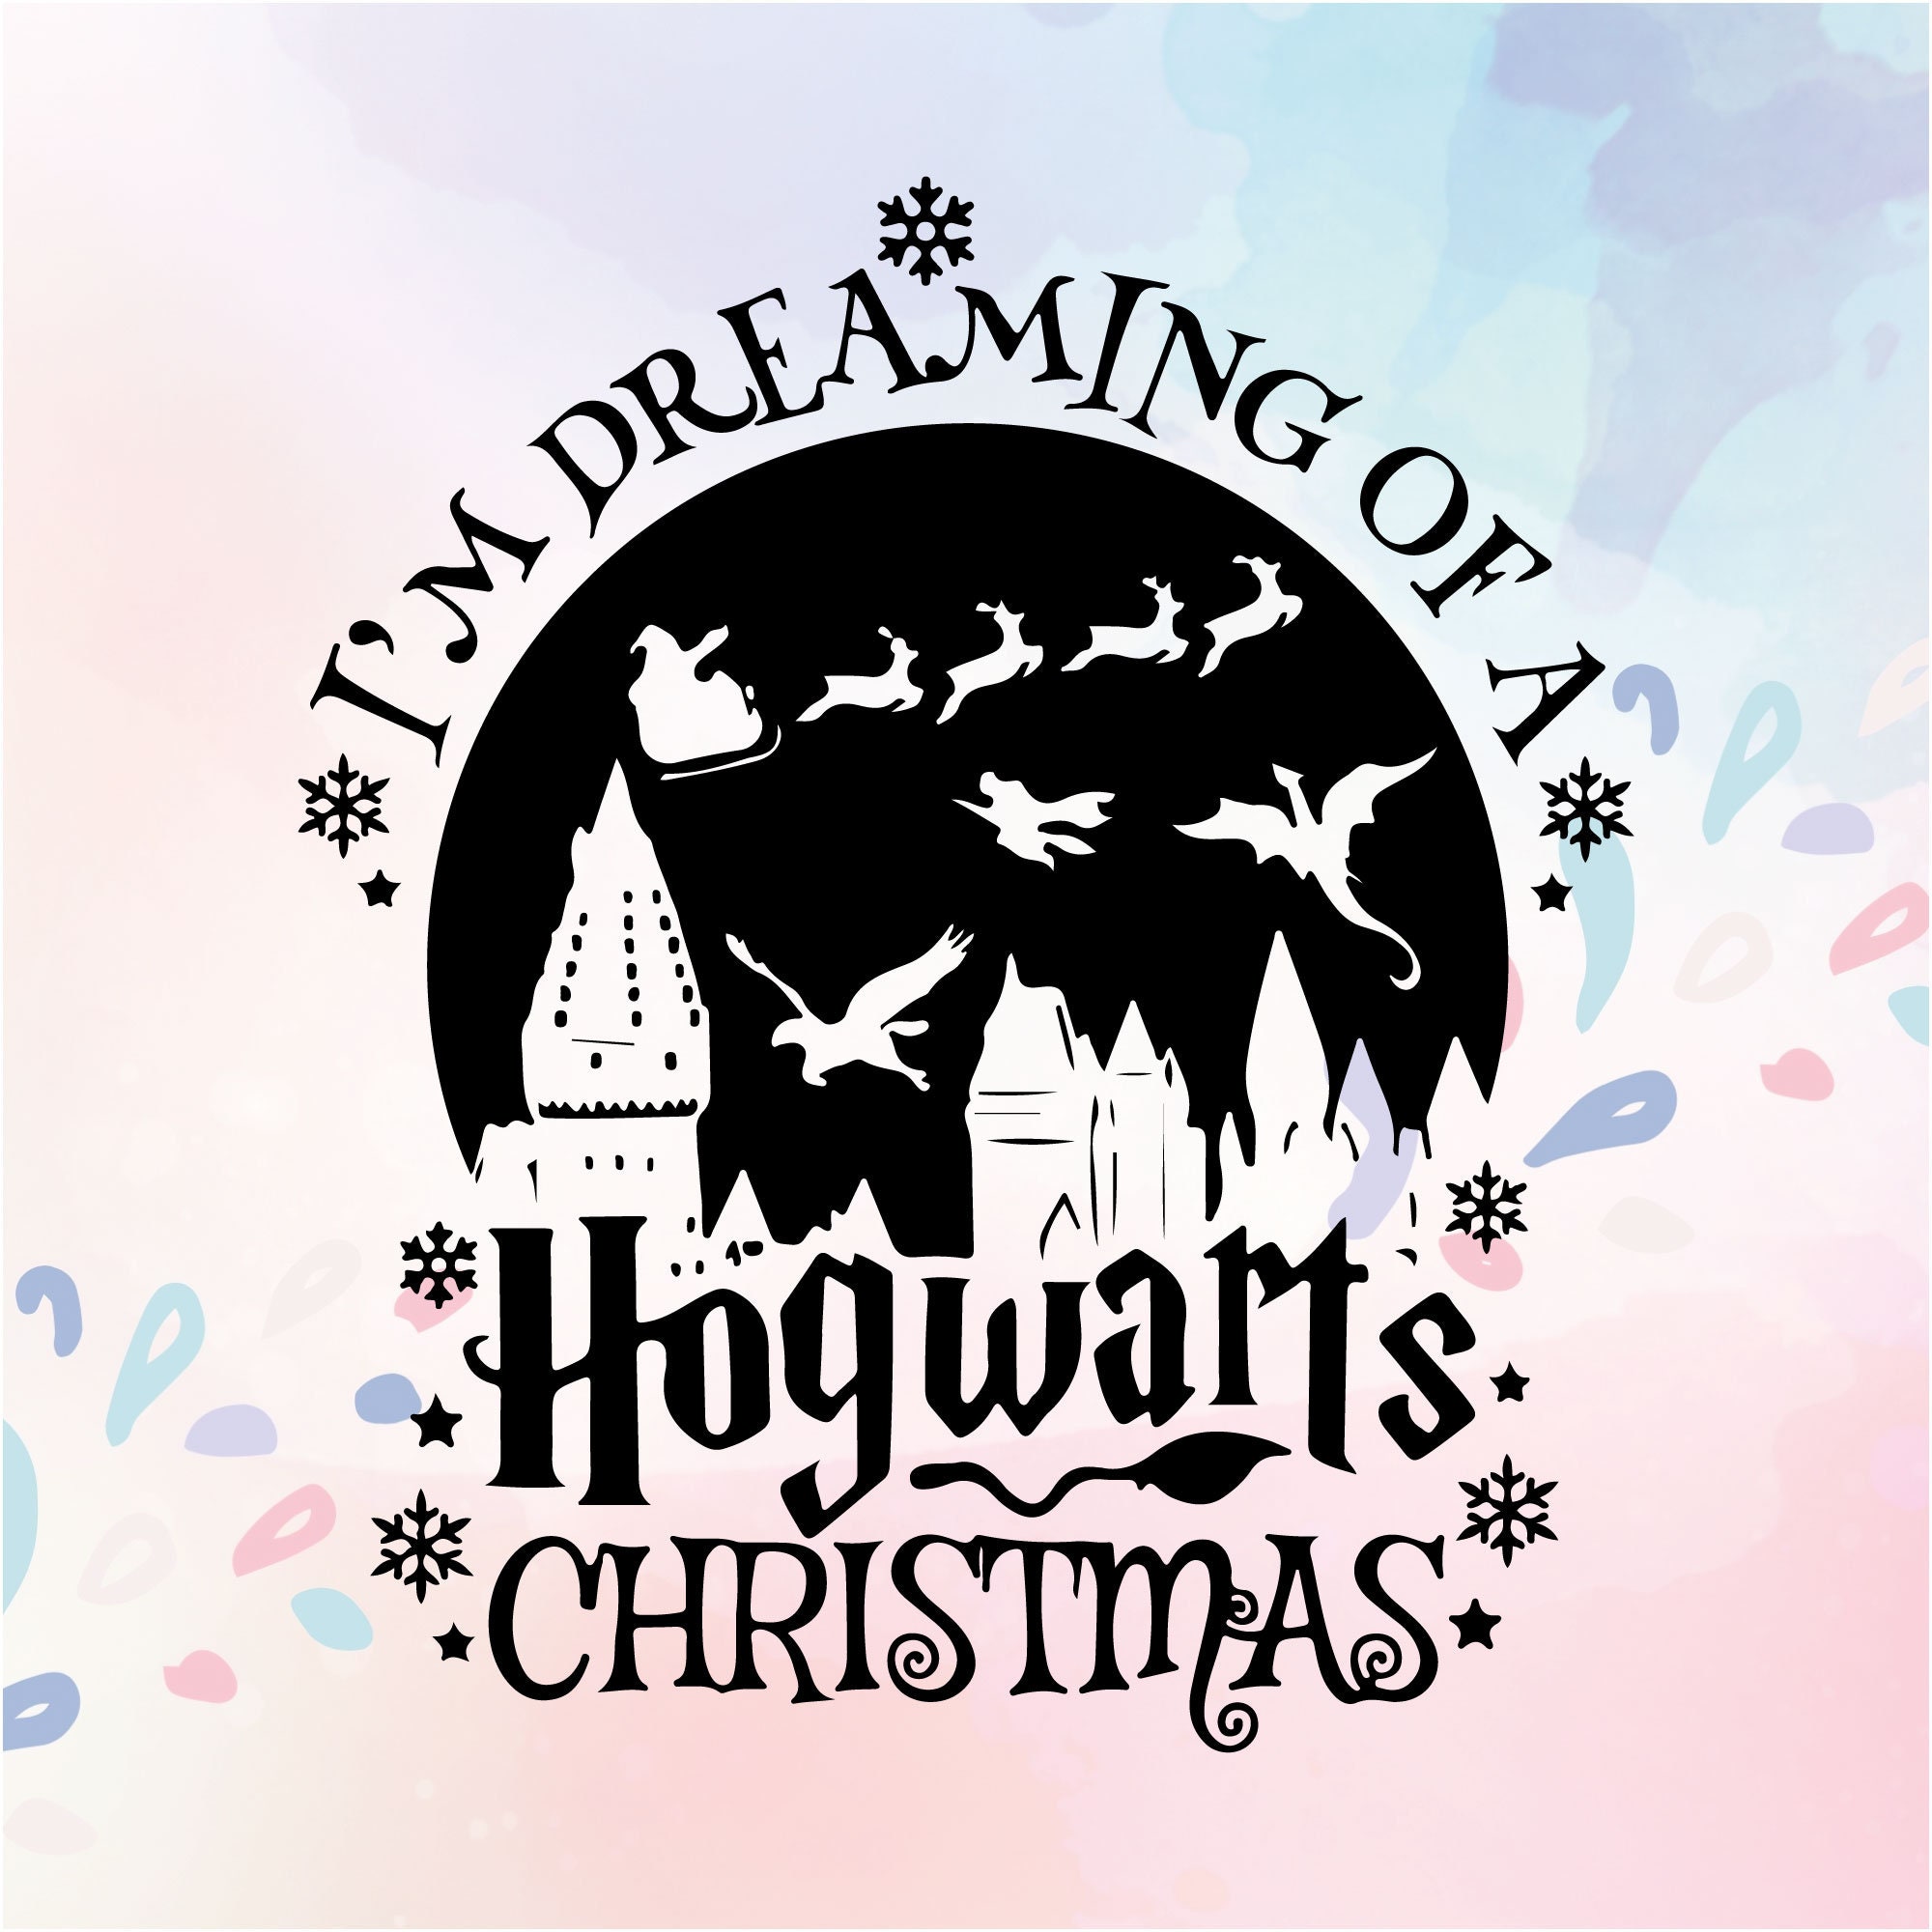 Harry Potter Series: I'm Dreaming of a Hogwarts Christmas Sticker